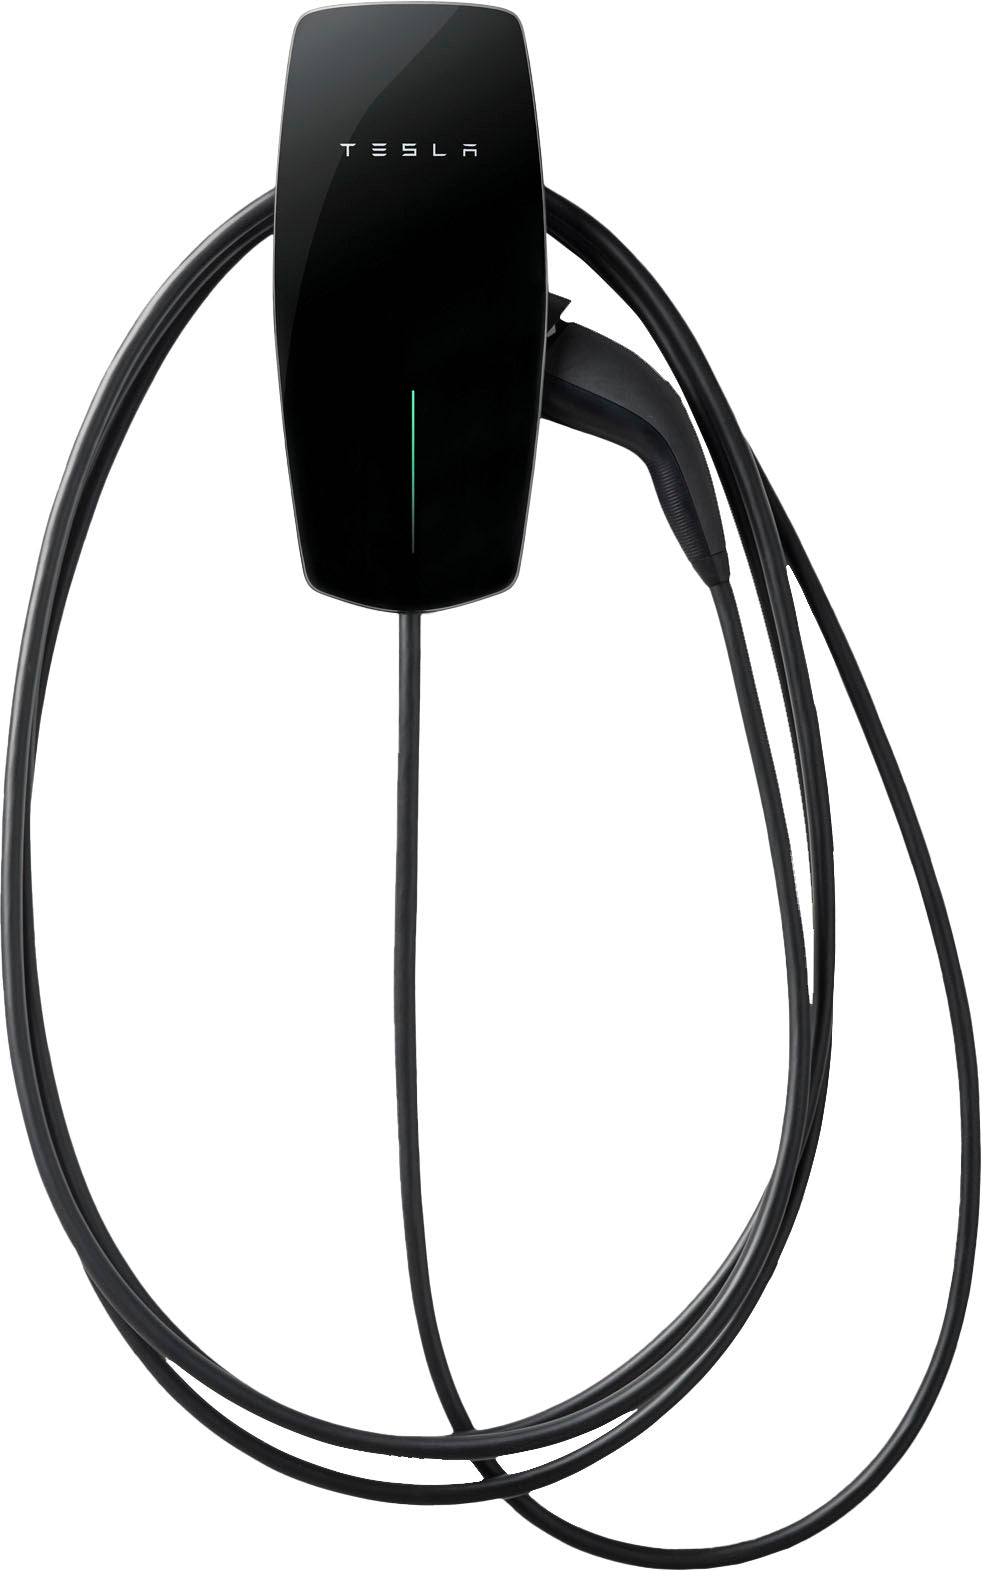 Tesla - Wall Connector J1772 Hardwired Electric Vehicle (EV) Charger - up to 48A - 24' - Black_1